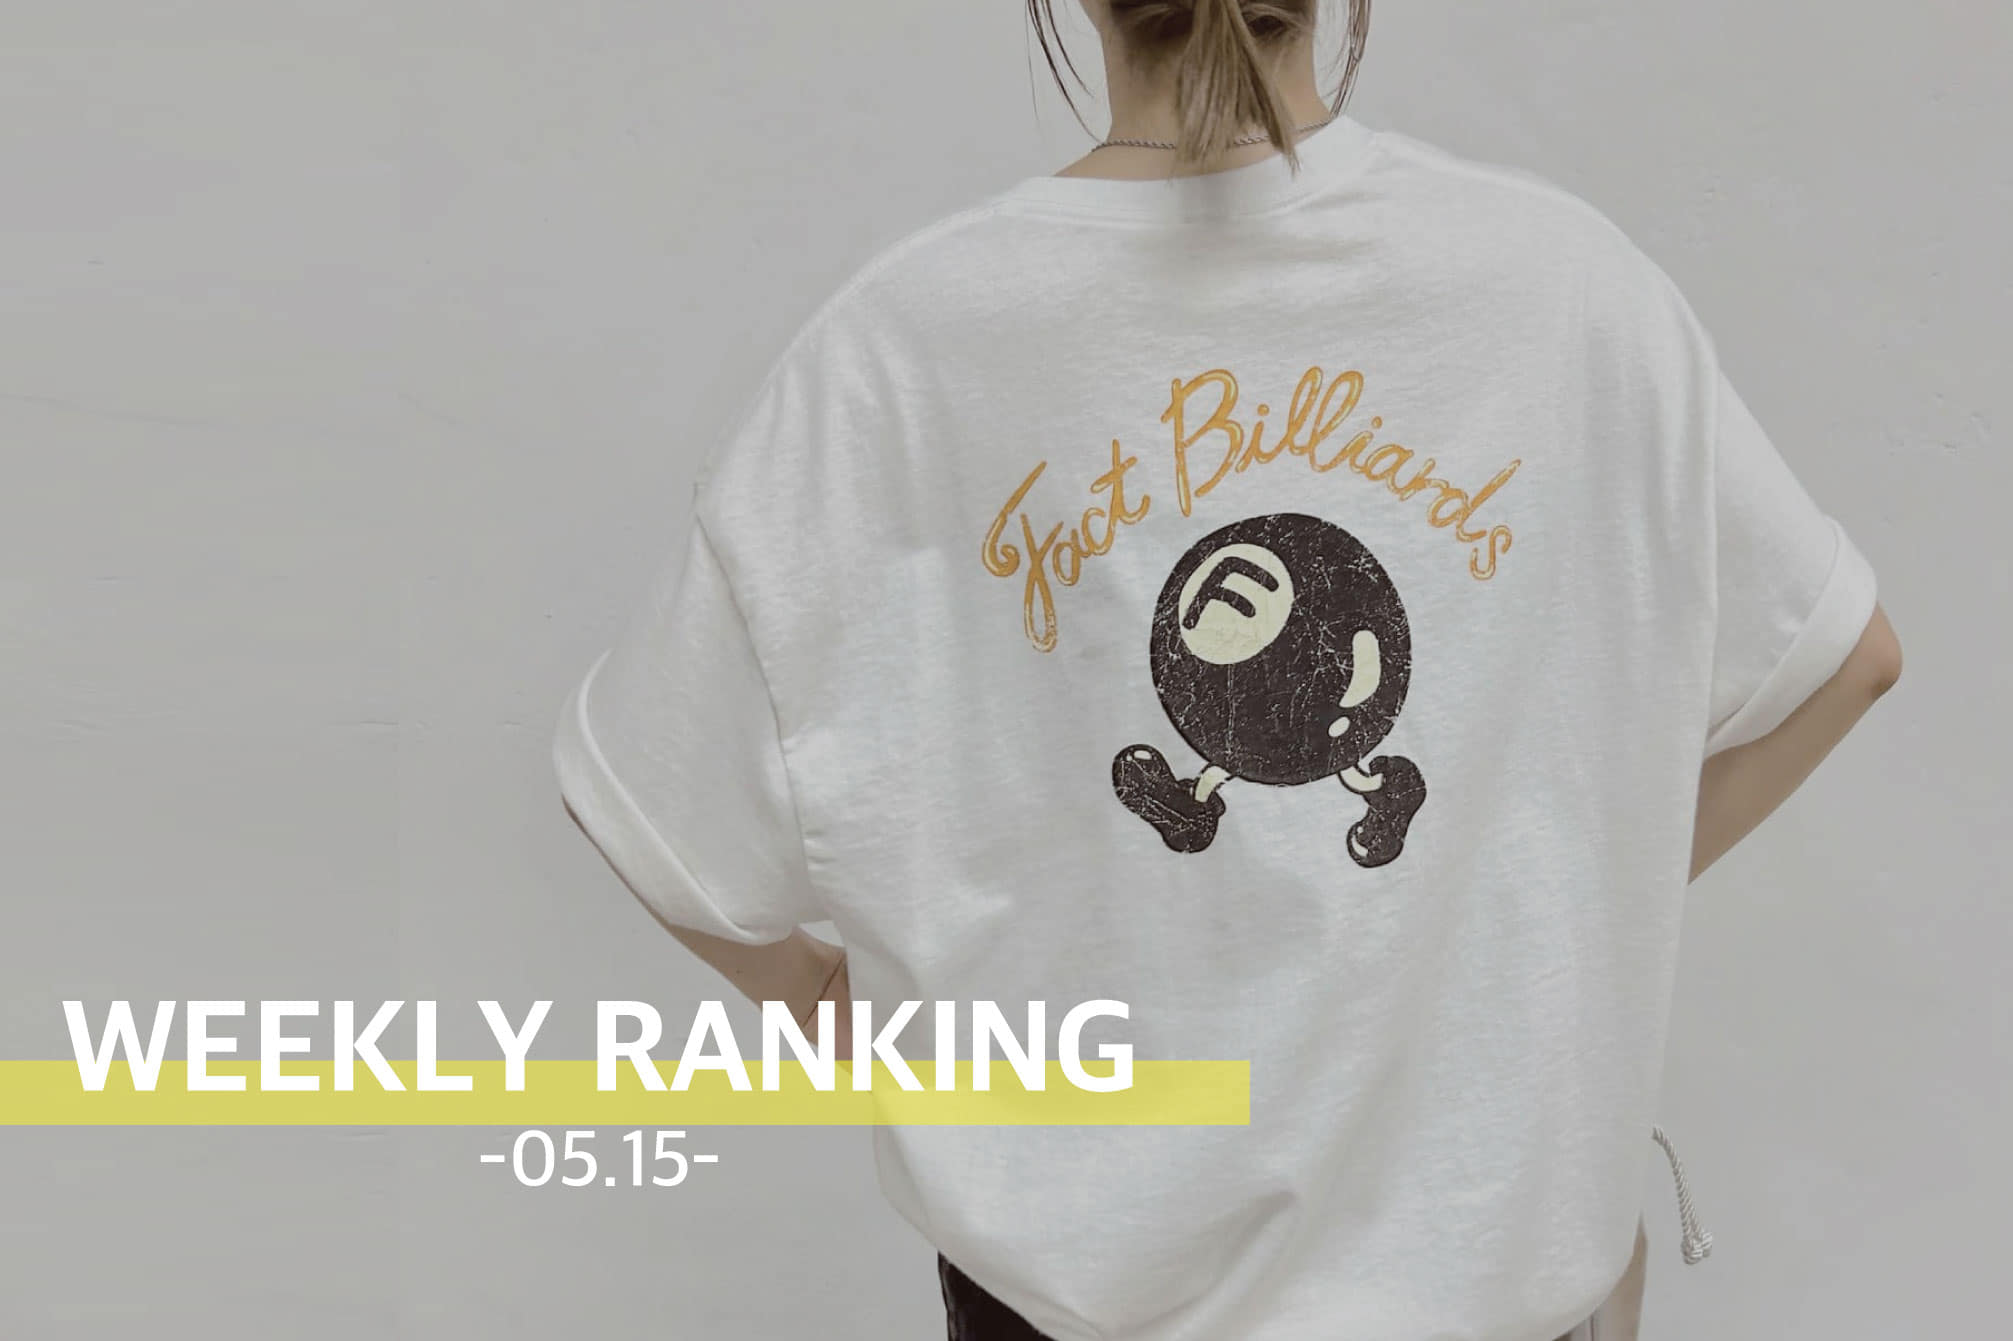 WHO’S WHO gallery 【WEEKLY RANKING  -05.15-】